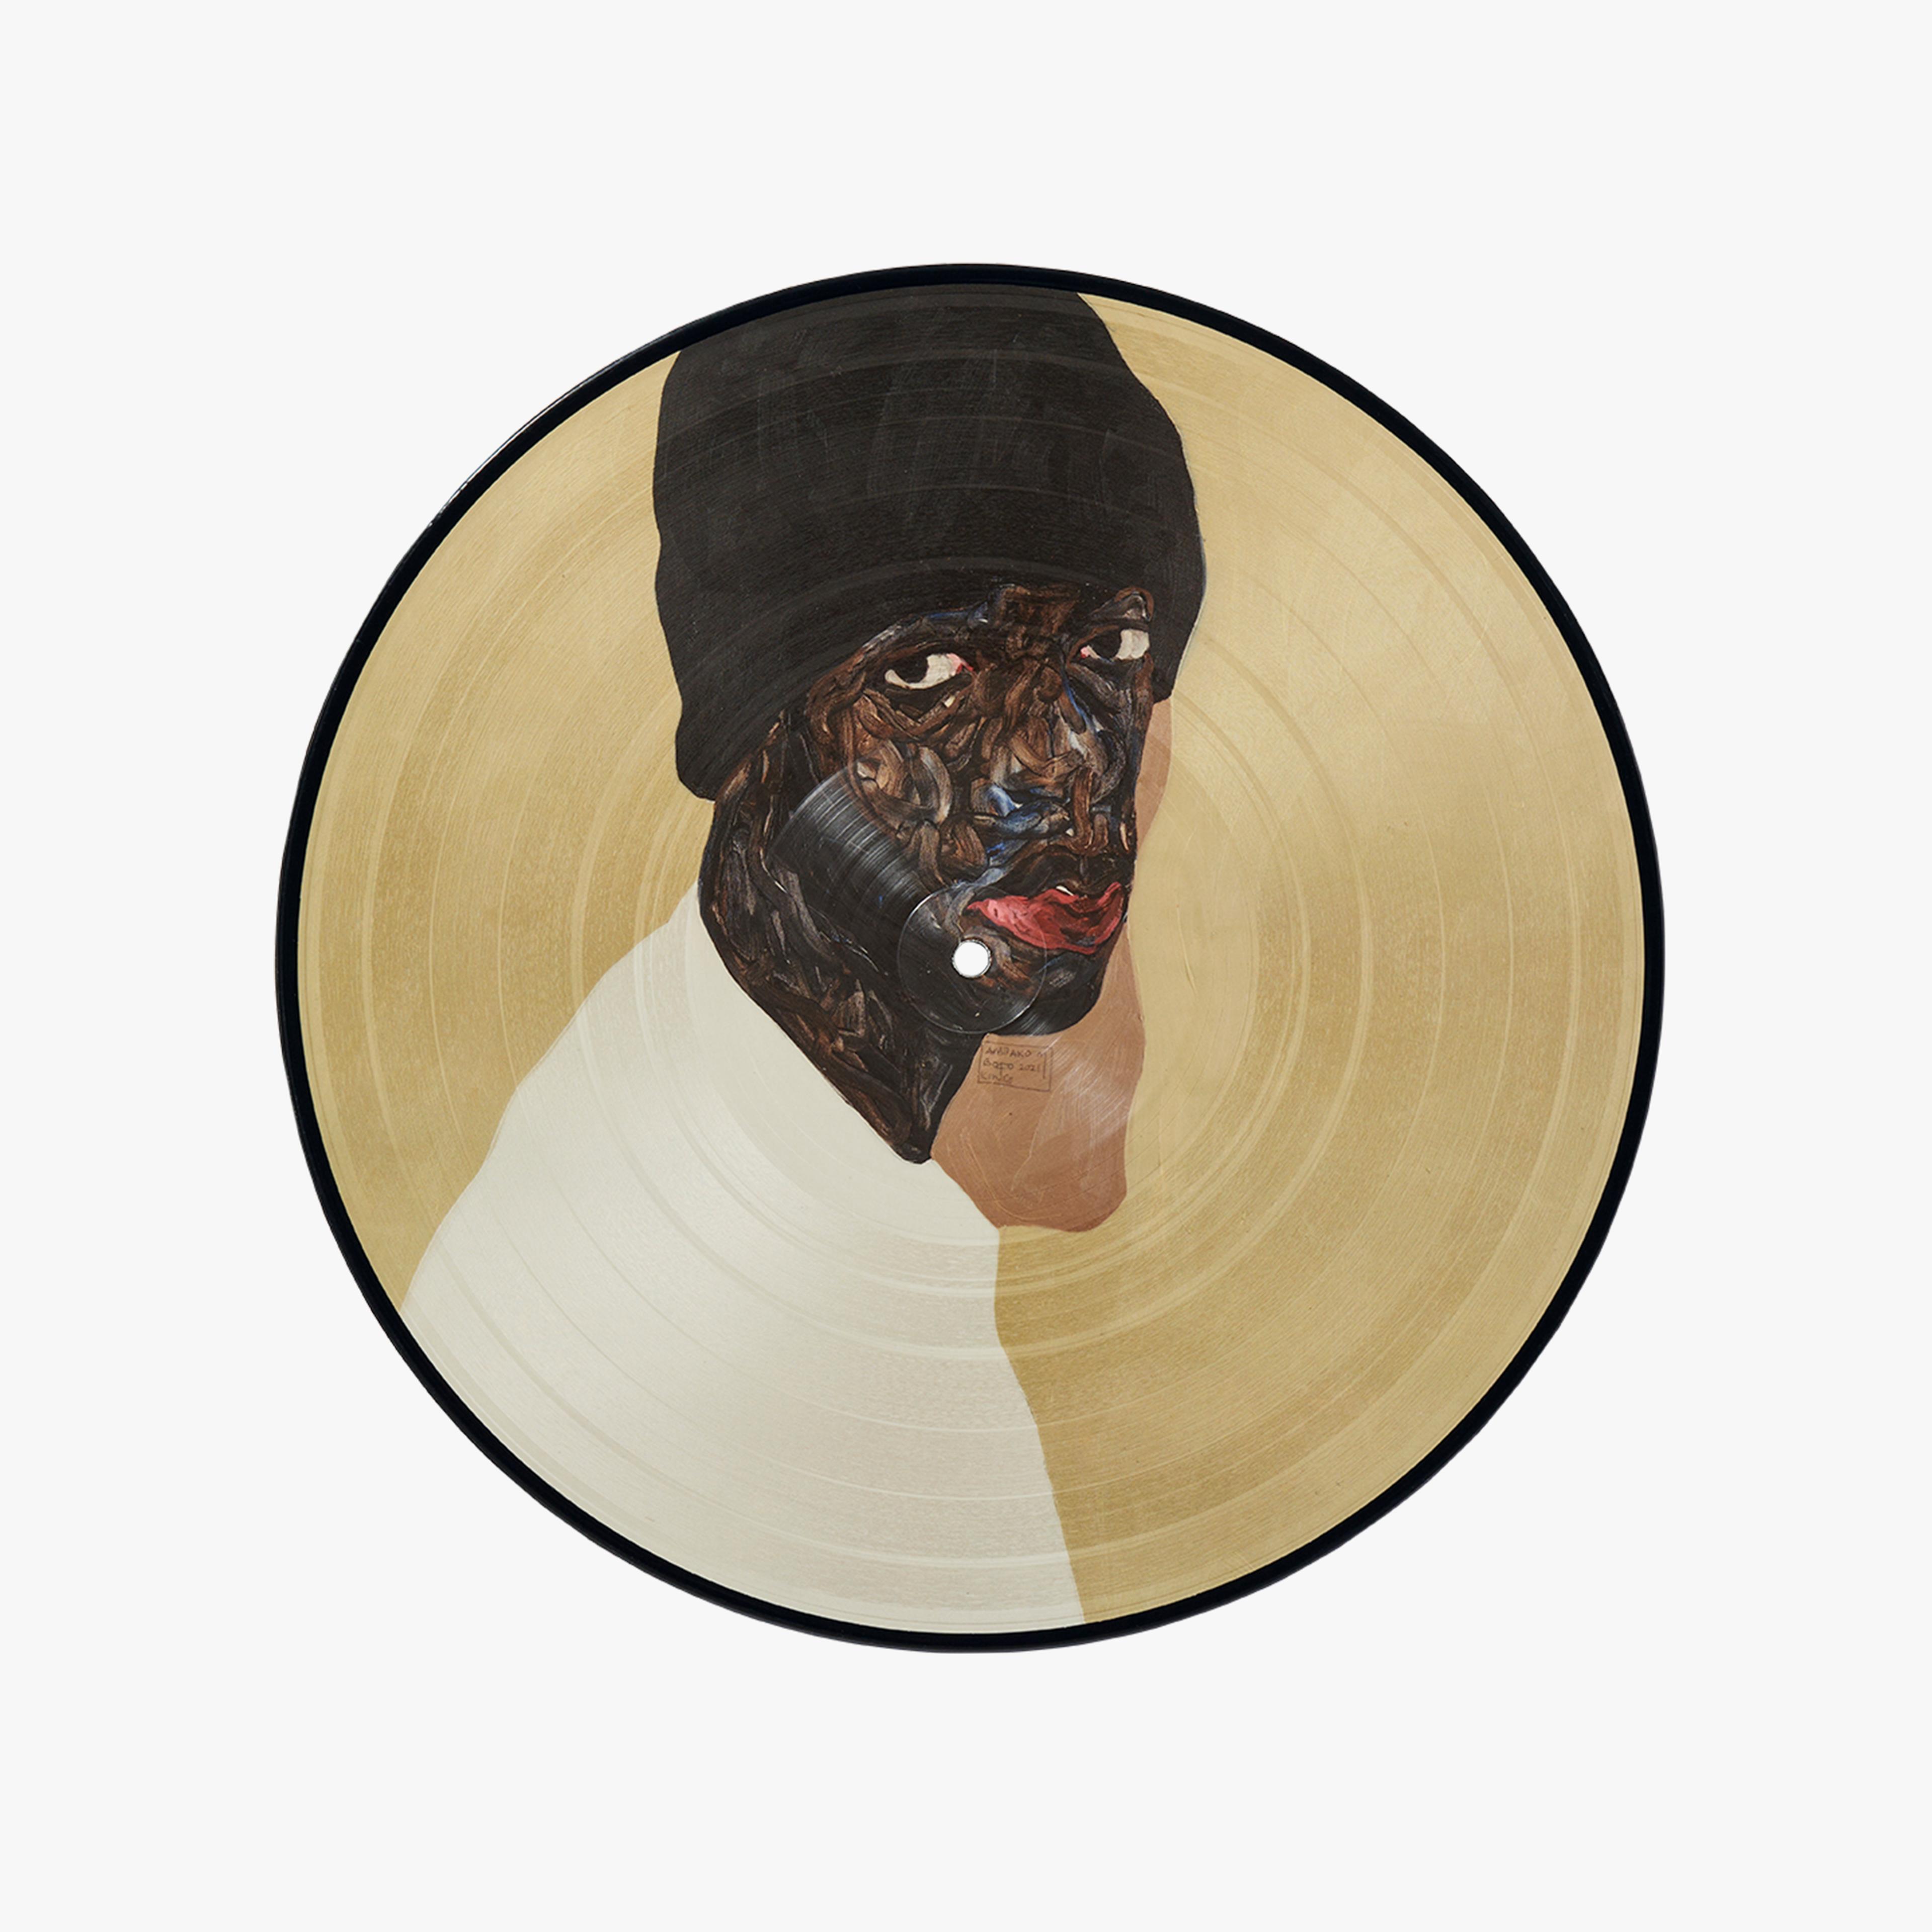 Alternate View 2 of 6lack - Free 6lack by Amoako Boafo Gallery Picture Disc